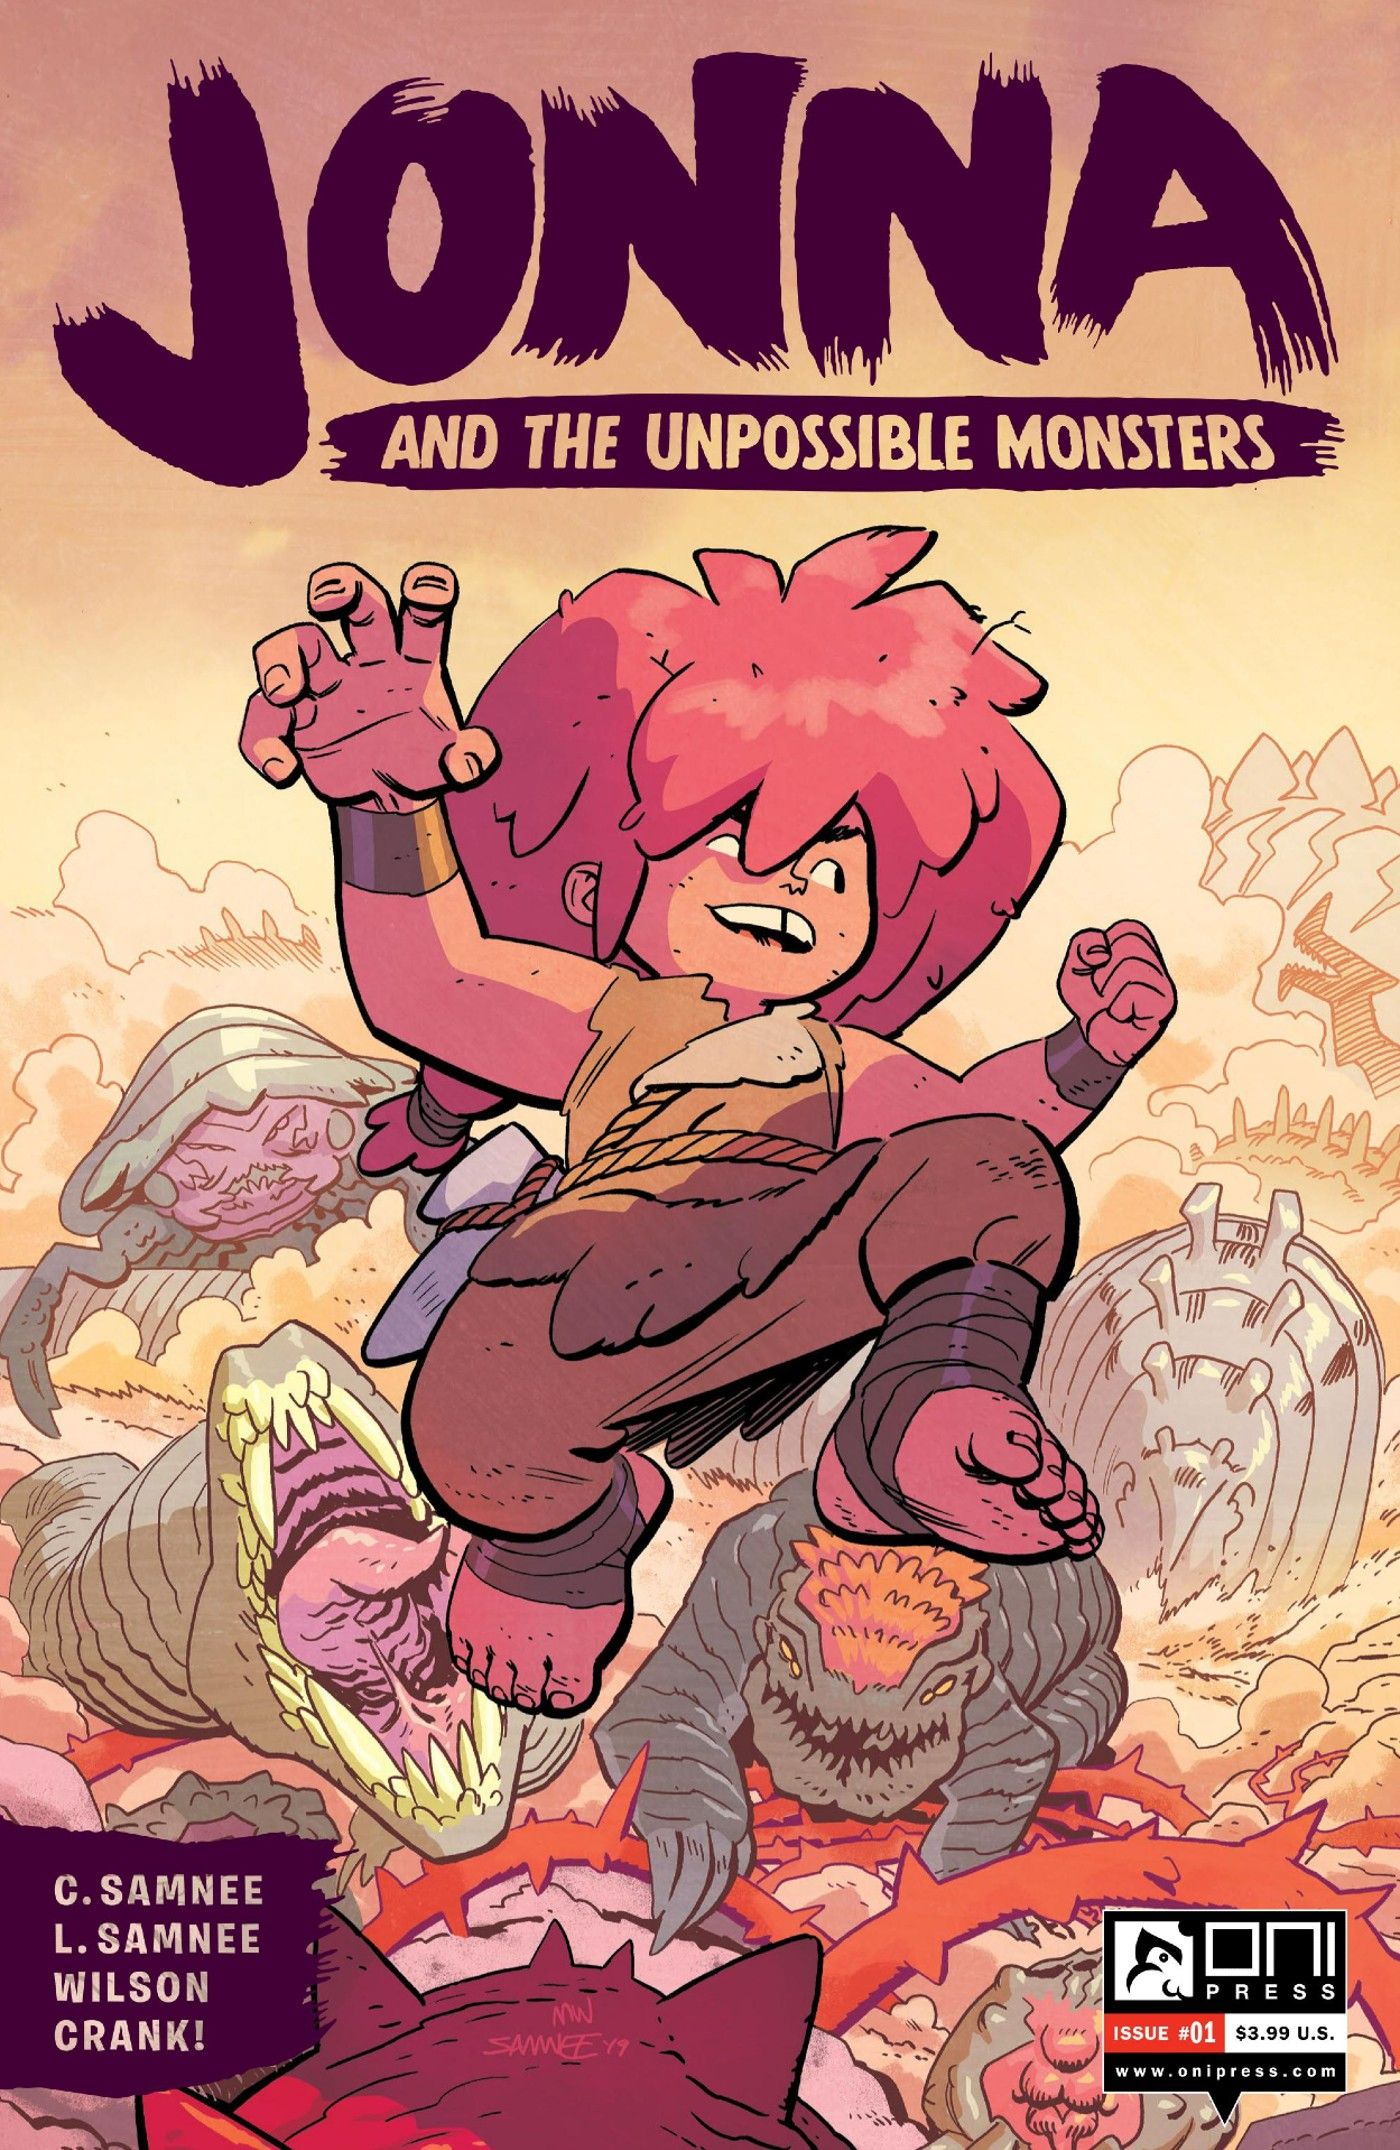 Read The Full First Issue of JONNA AND THE UNPOSSIBLE MONSTERS Now (Exclusive)